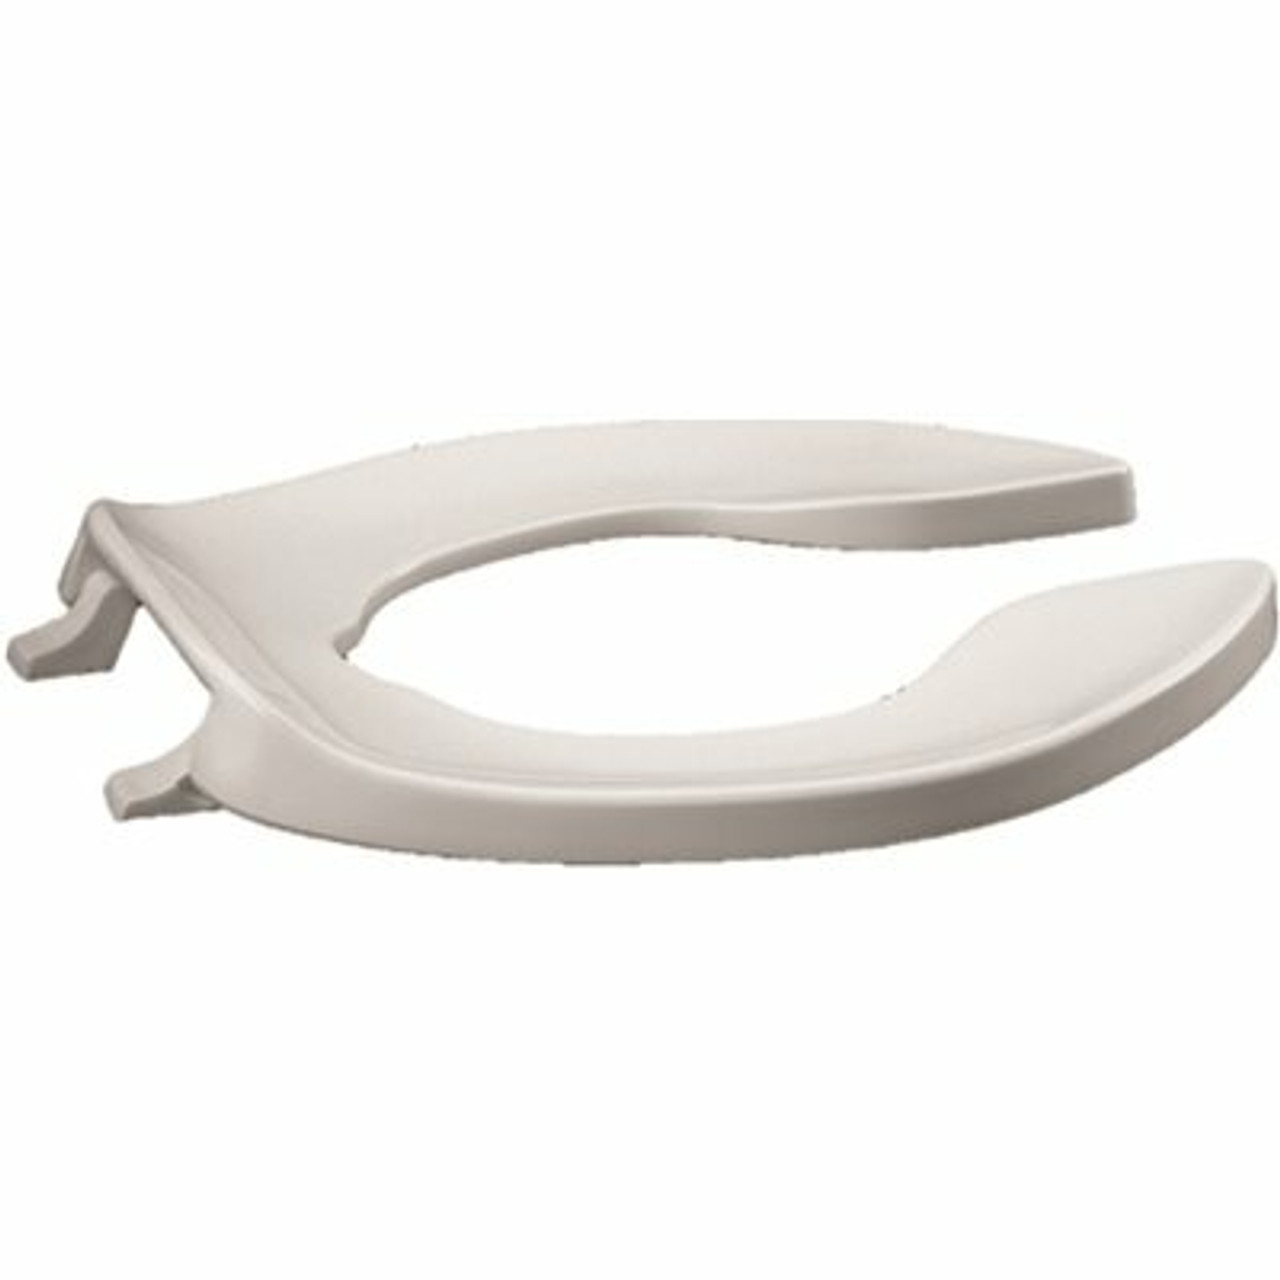 Centoco Elongated Open Front No Cover Commercial Toilet Seat In White - 312584655